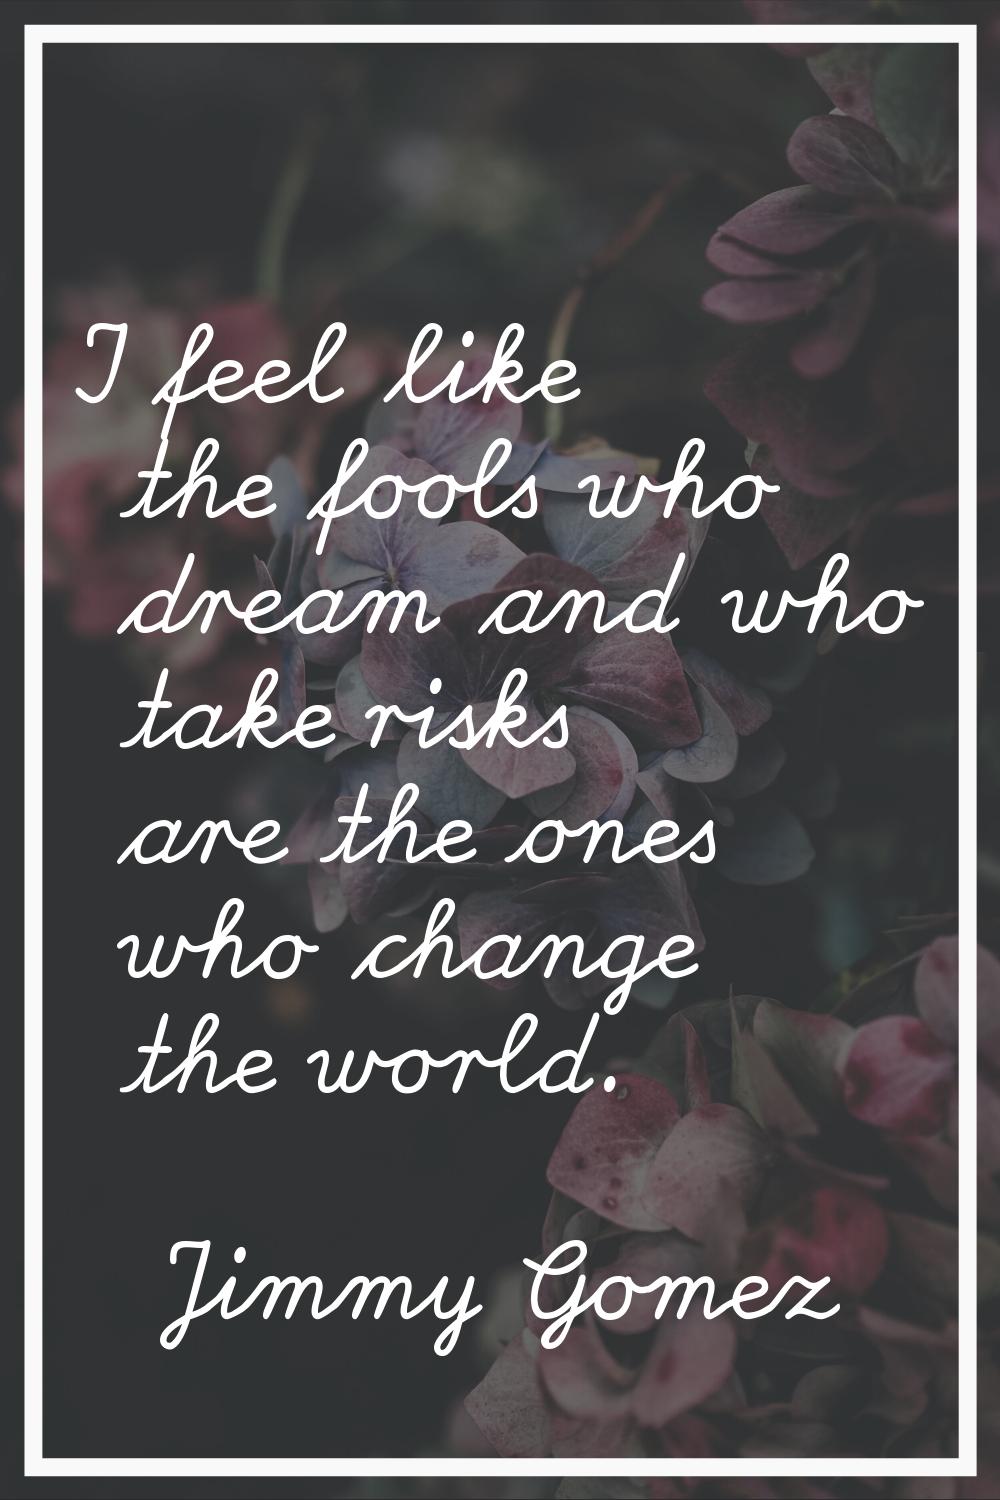 I feel like the fools who dream and who take risks are the ones who change the world.